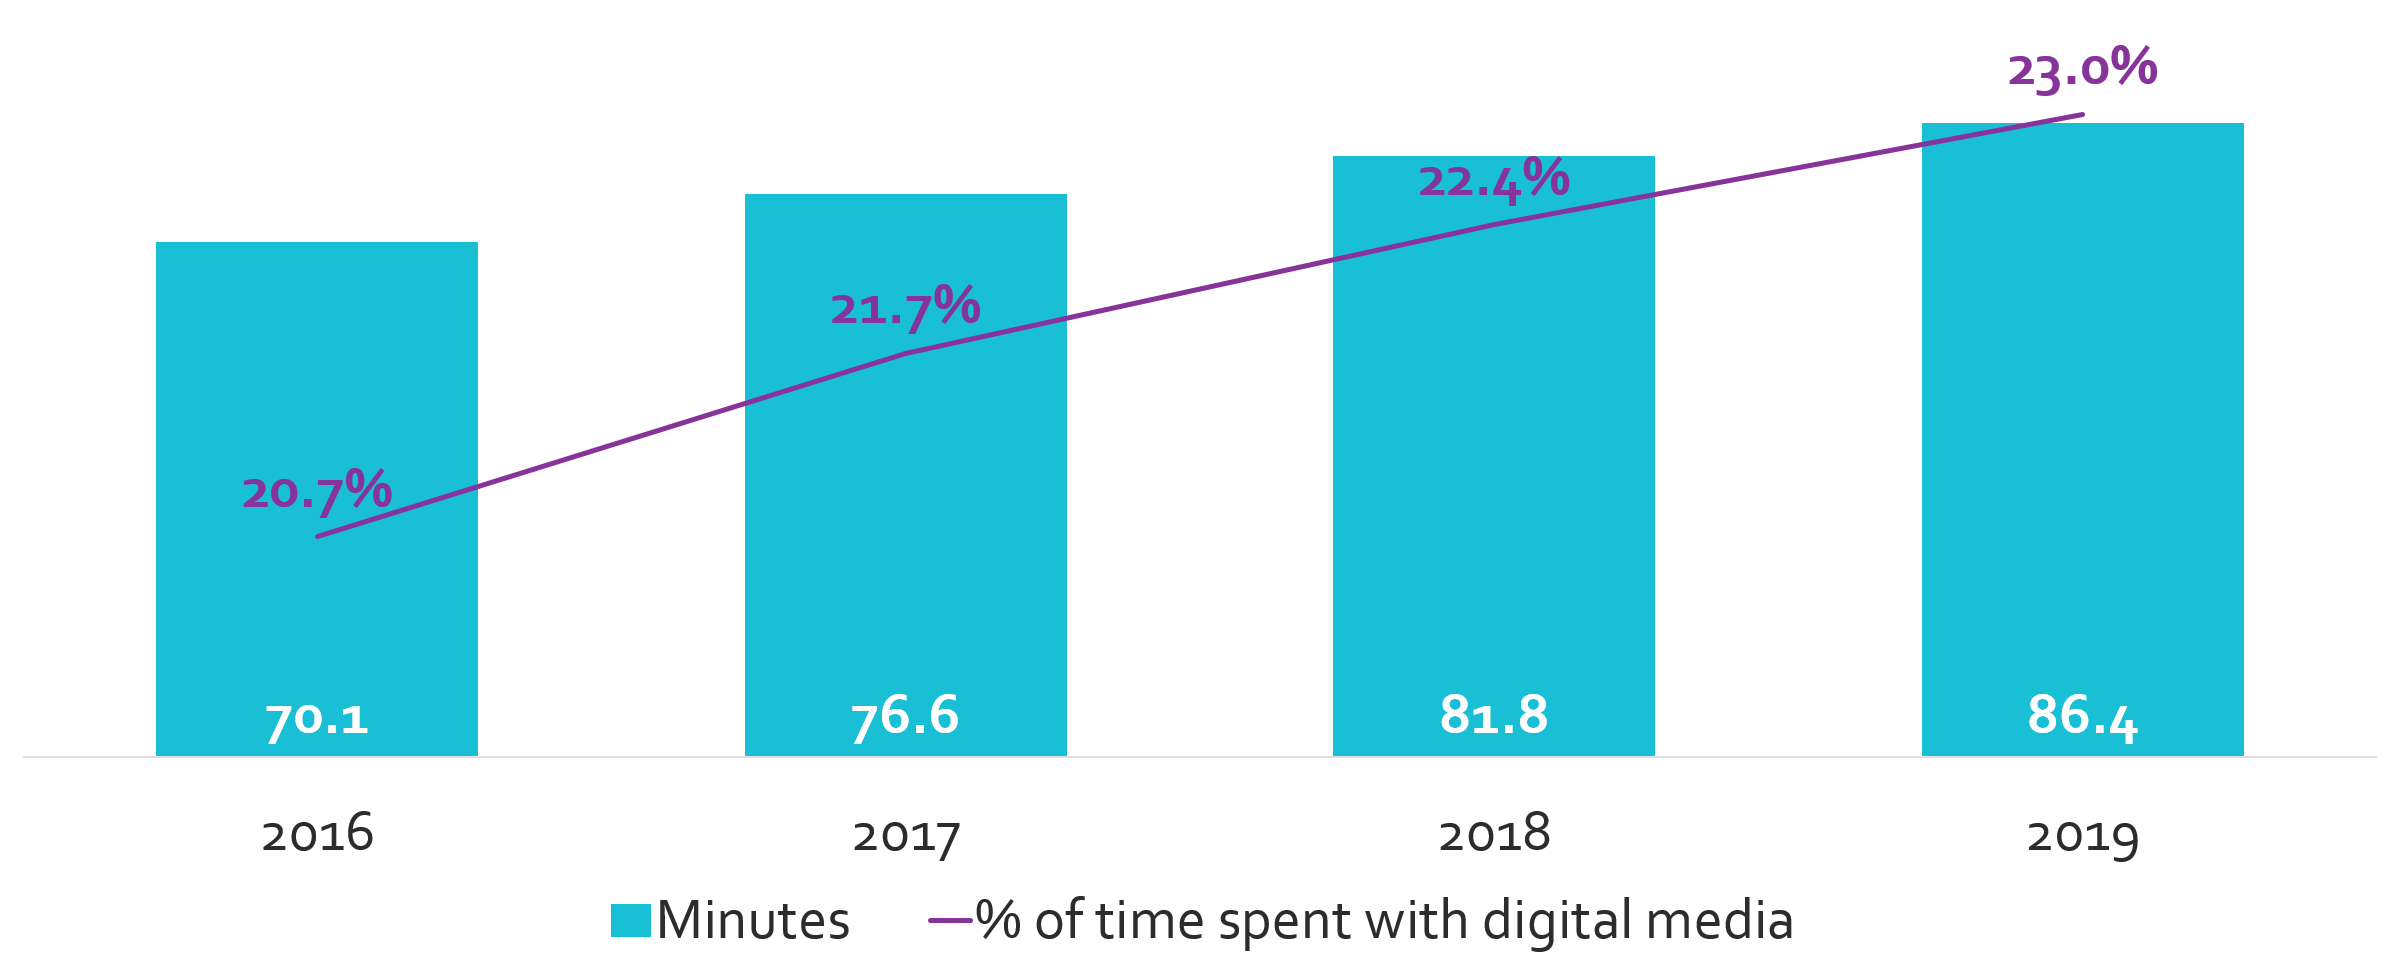 Average time spent per day with digital video by U.S. adults